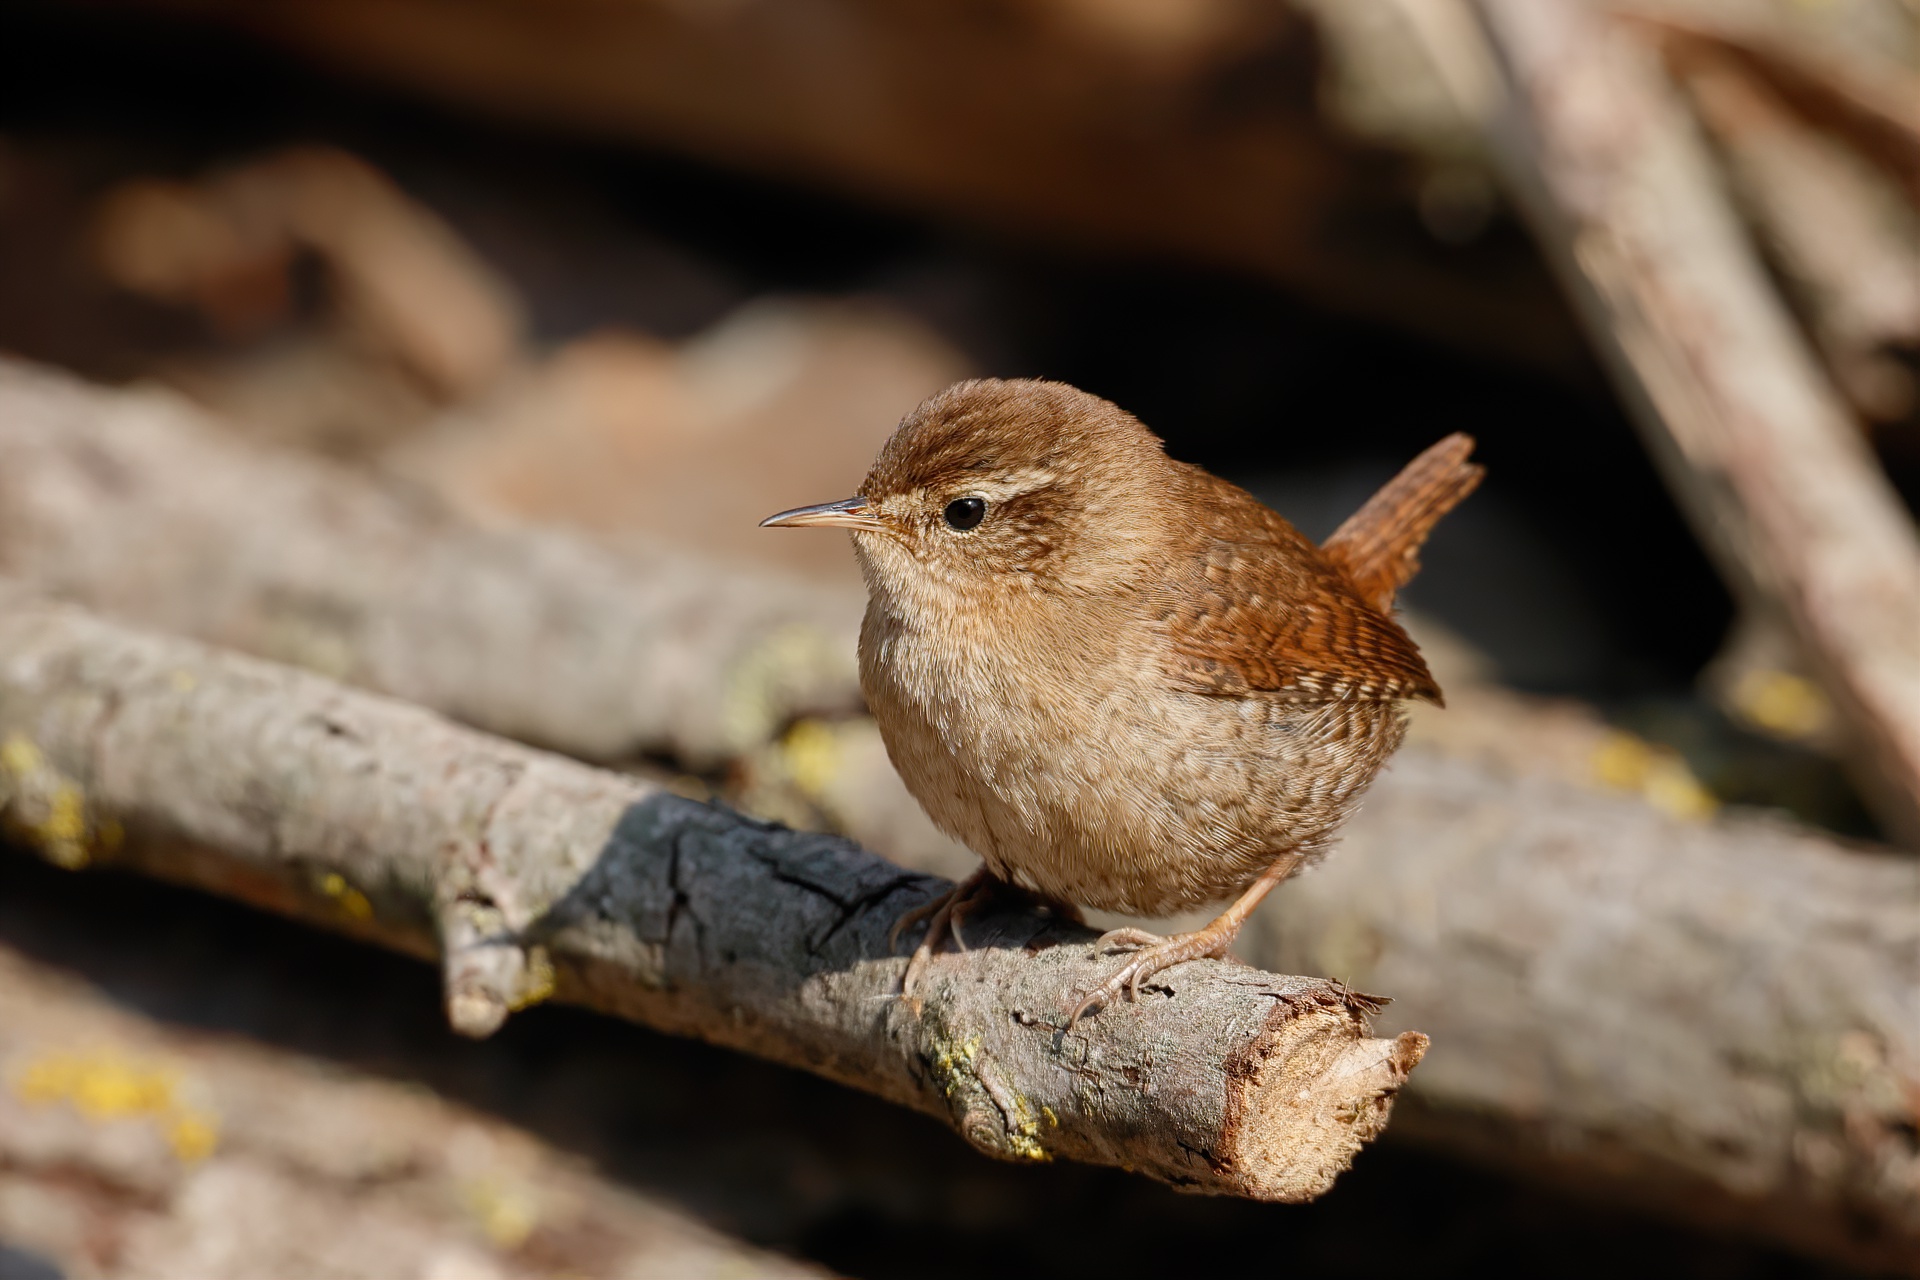 Wren warms up in the early morning sun ...